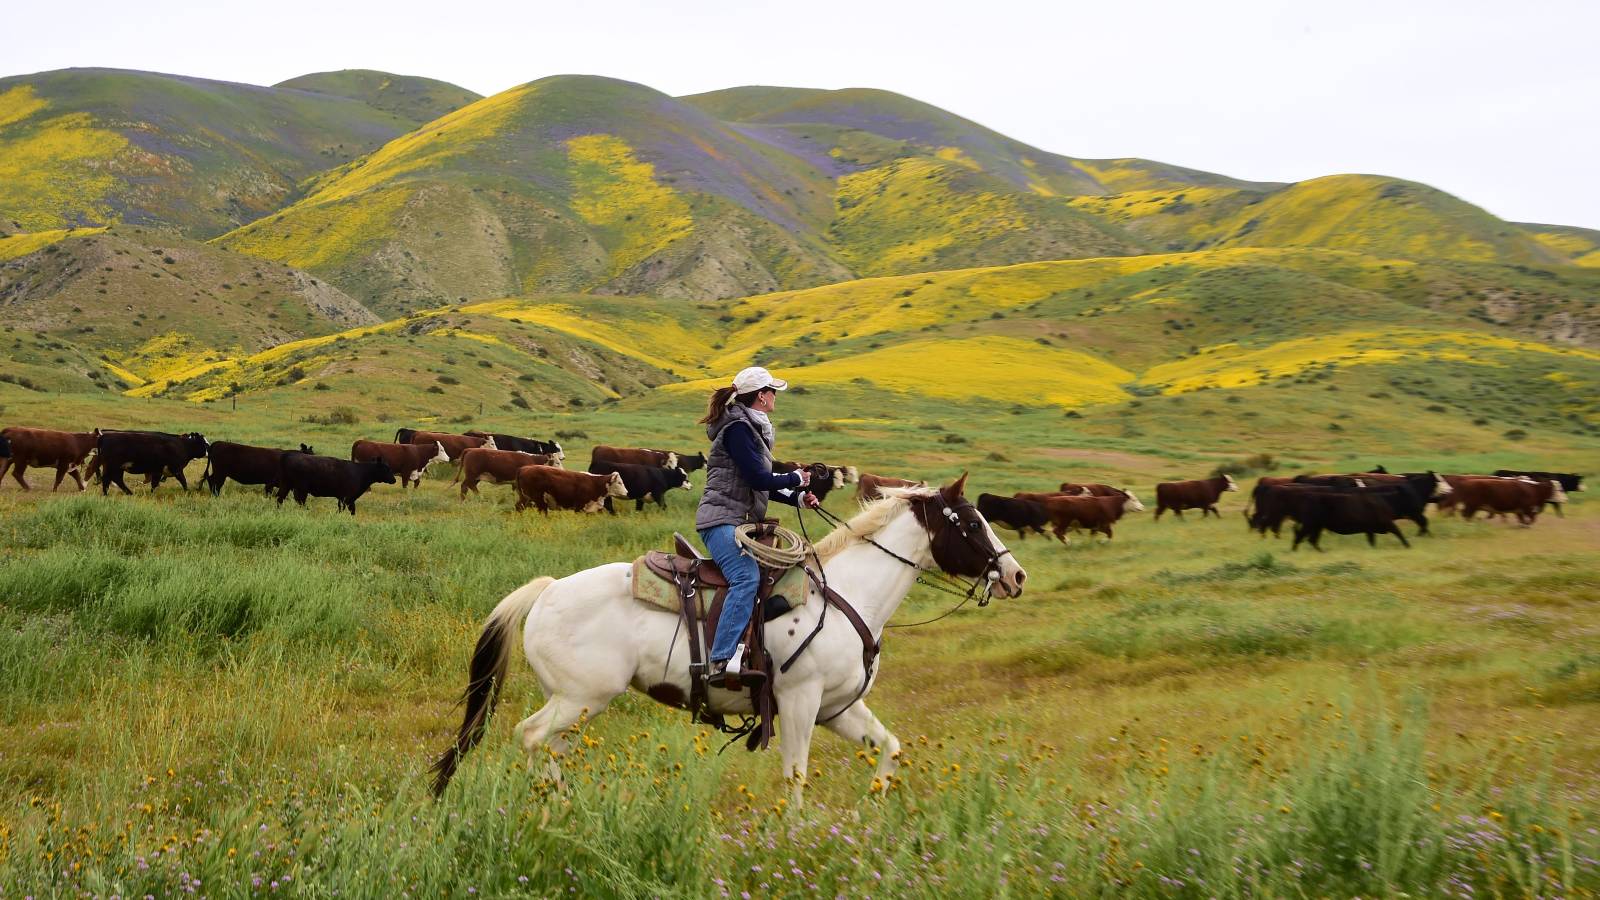 a person rides a horse against the backdrop of hills covered in wildflowers with cattle in the background